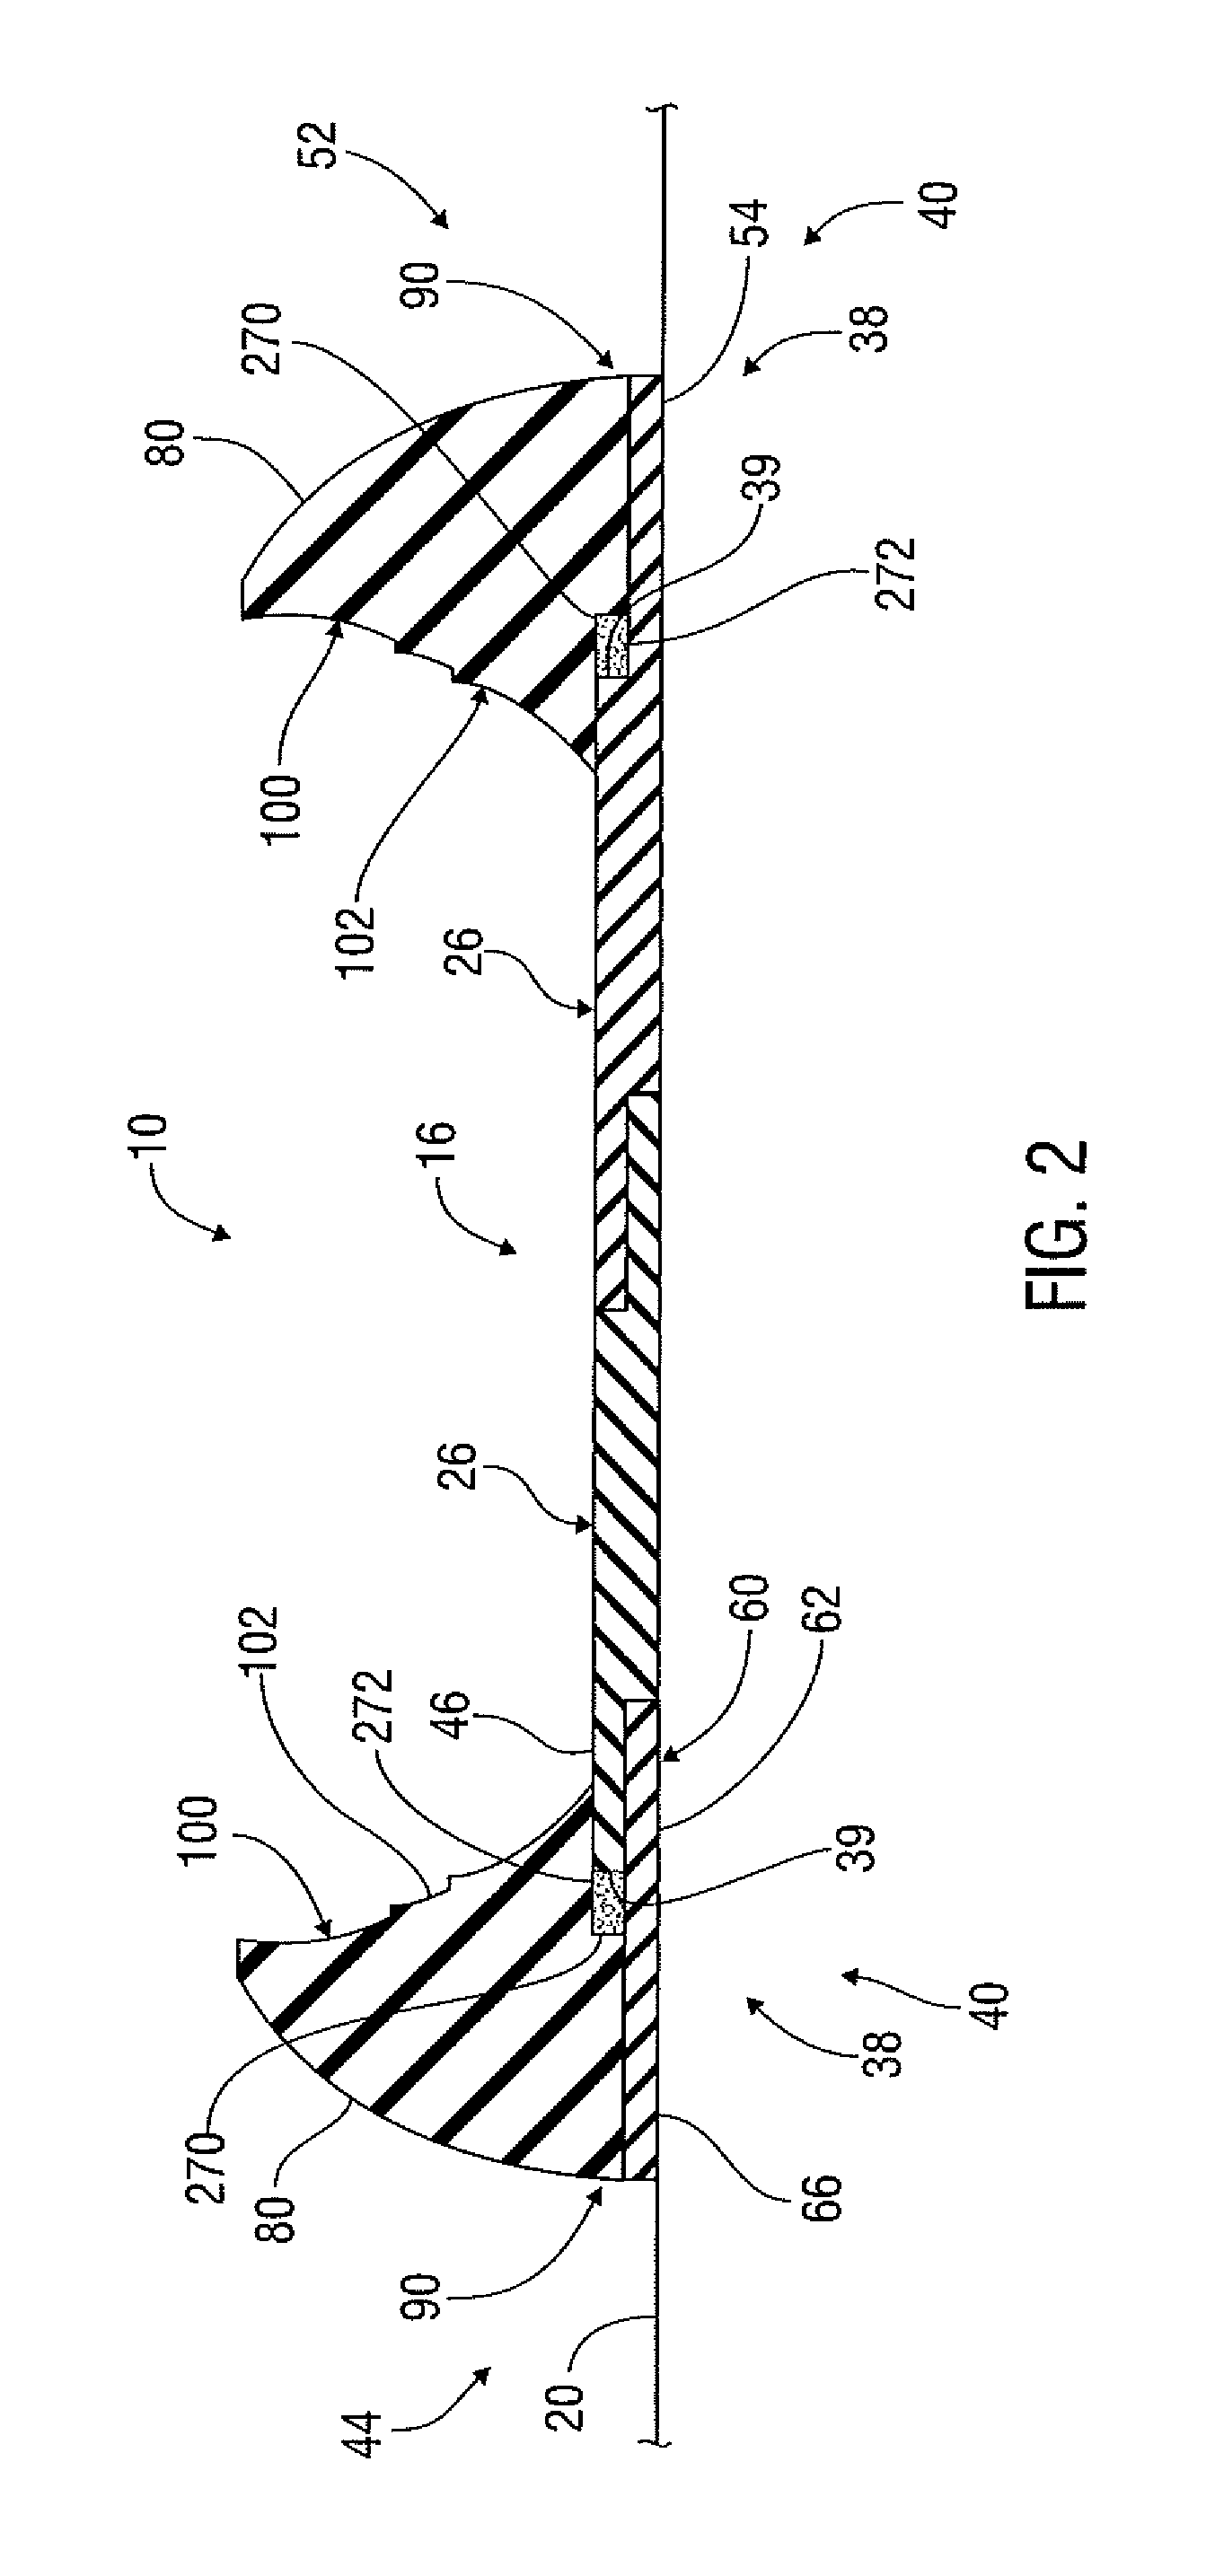 Liquid containment system for use with load-supporting surfaces